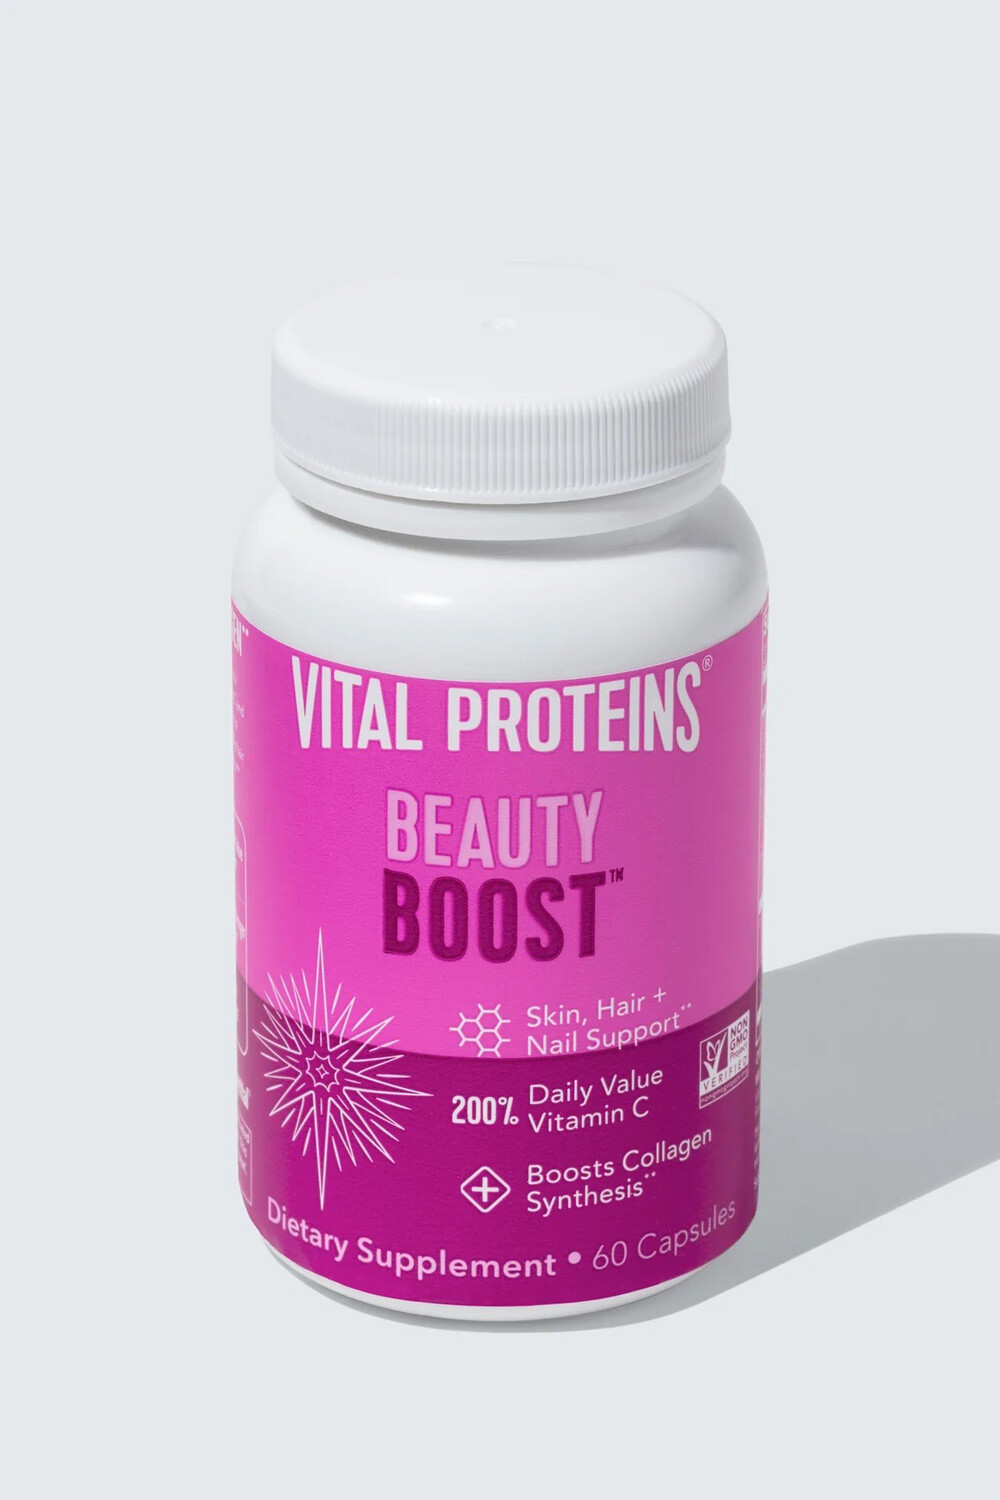 Vital Proteins Beauty Boost Collagen Synthesis Vitamin C 